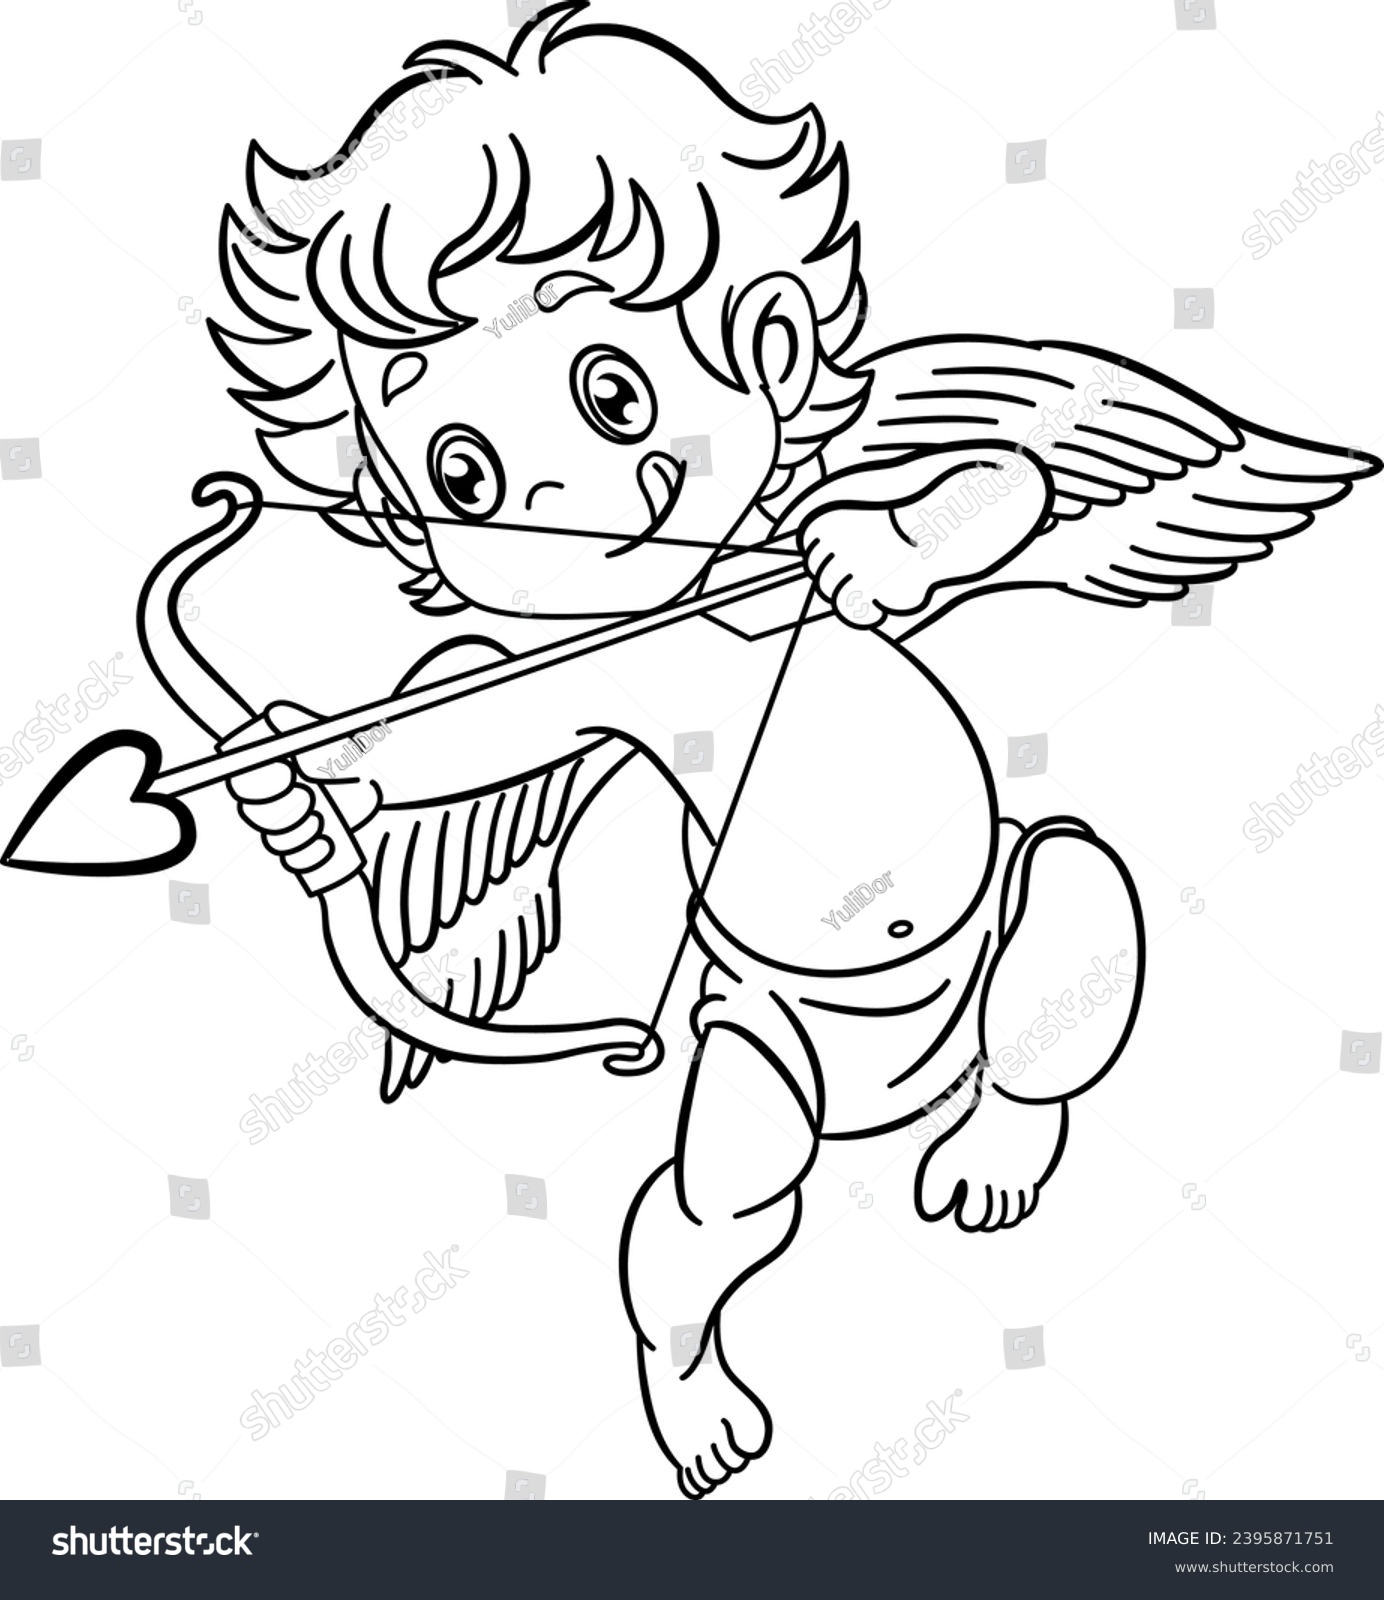 SVG of Cute Cupid Shoots Bow for Coloring Page. Vector Illustration of Cartoon Character for Valentines Day svg